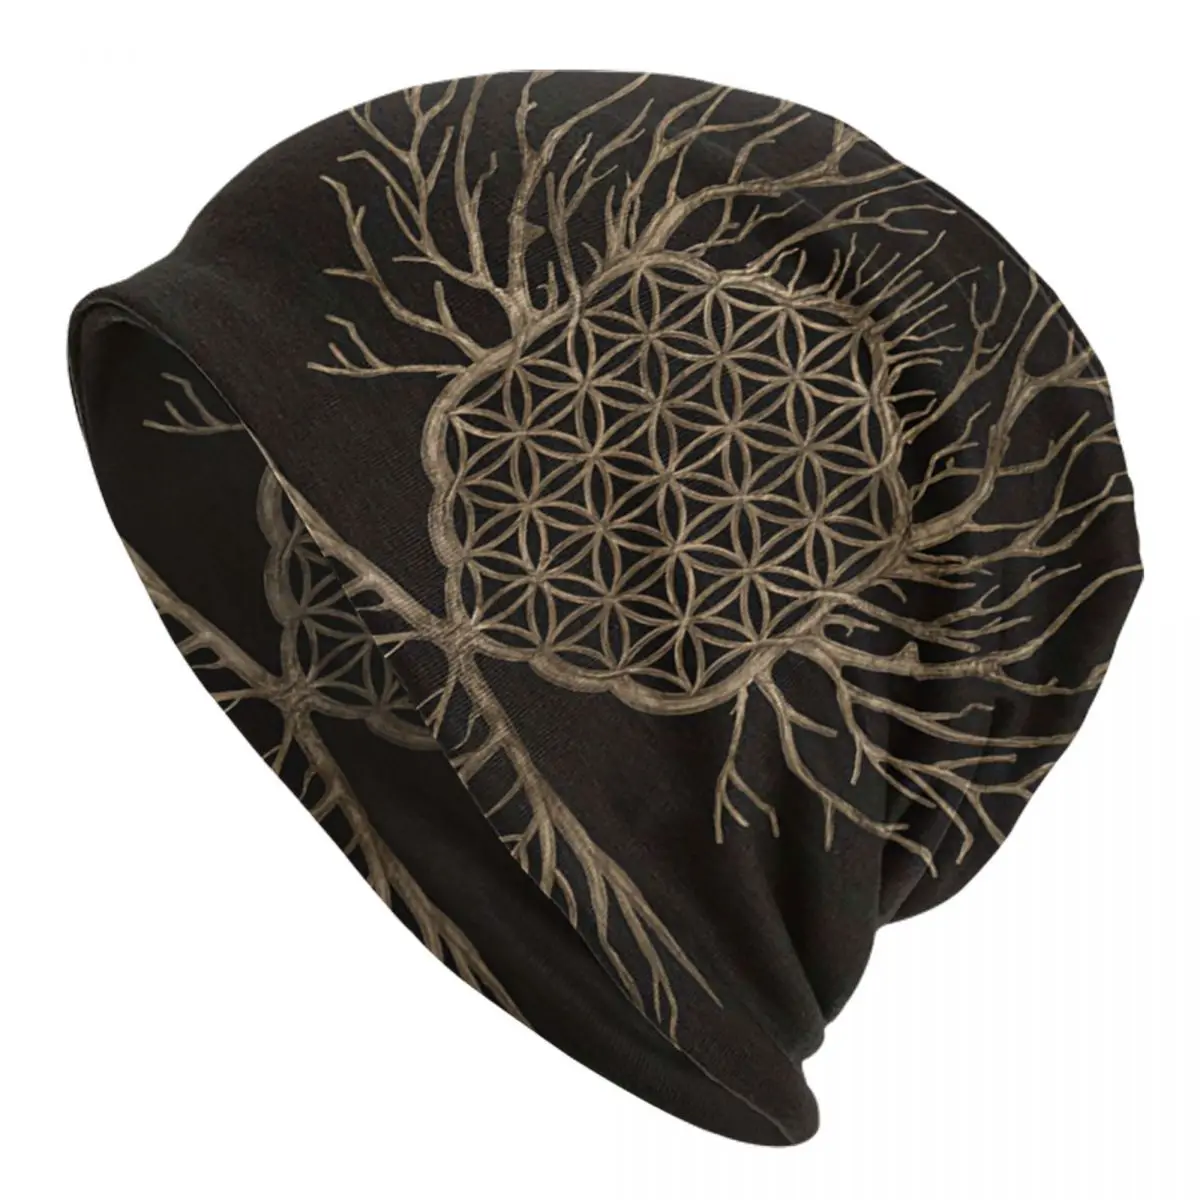 Flower Of Life In Tree Of Life Adult Men's Women's Knit Hat Keep warm winter Funny knitted hat